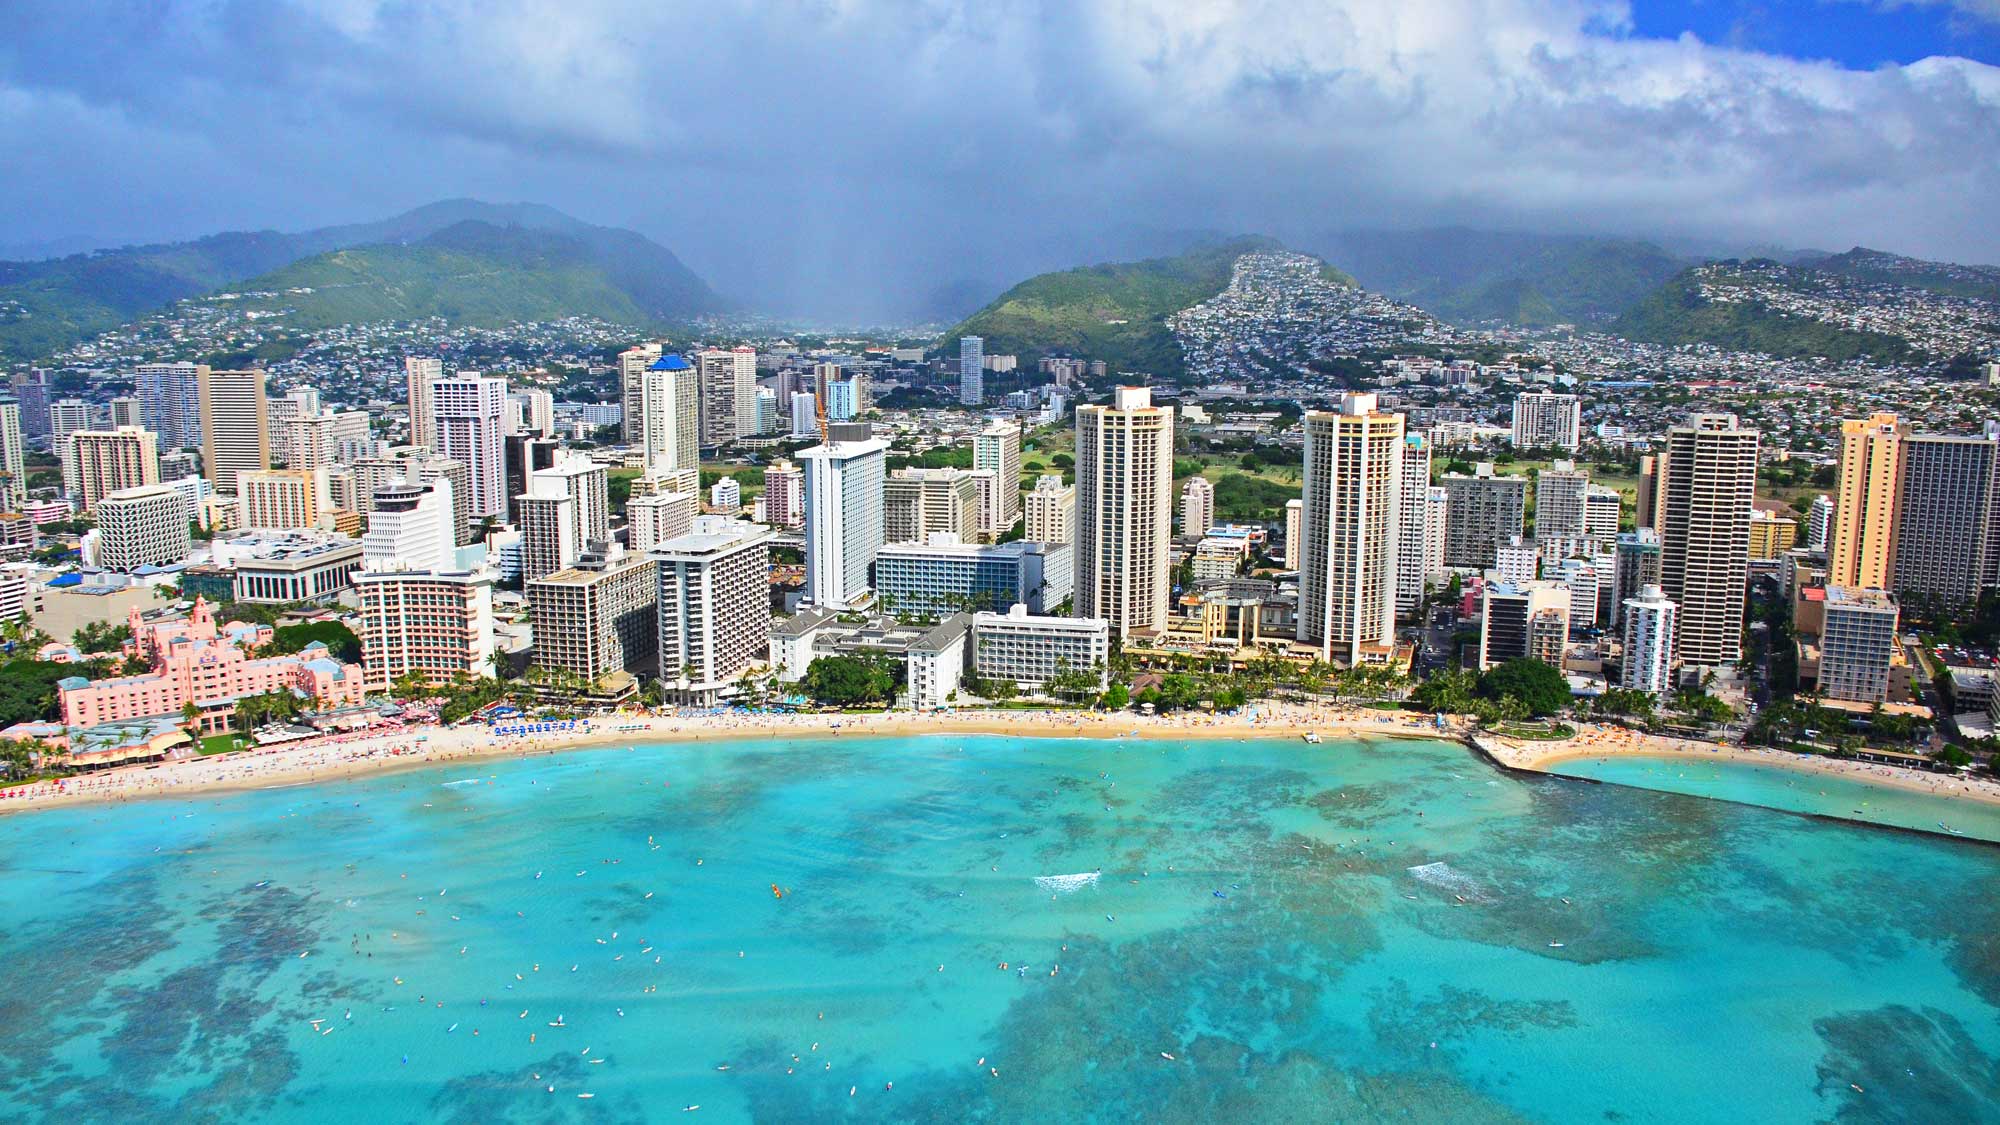 Photograph of Waikiki, Honolulu, O'ahu. The photo shows tall towers bordering a strip of white beach next of bright blue water. In the background, building of a city stretch into the distance up vegetated hillsides.